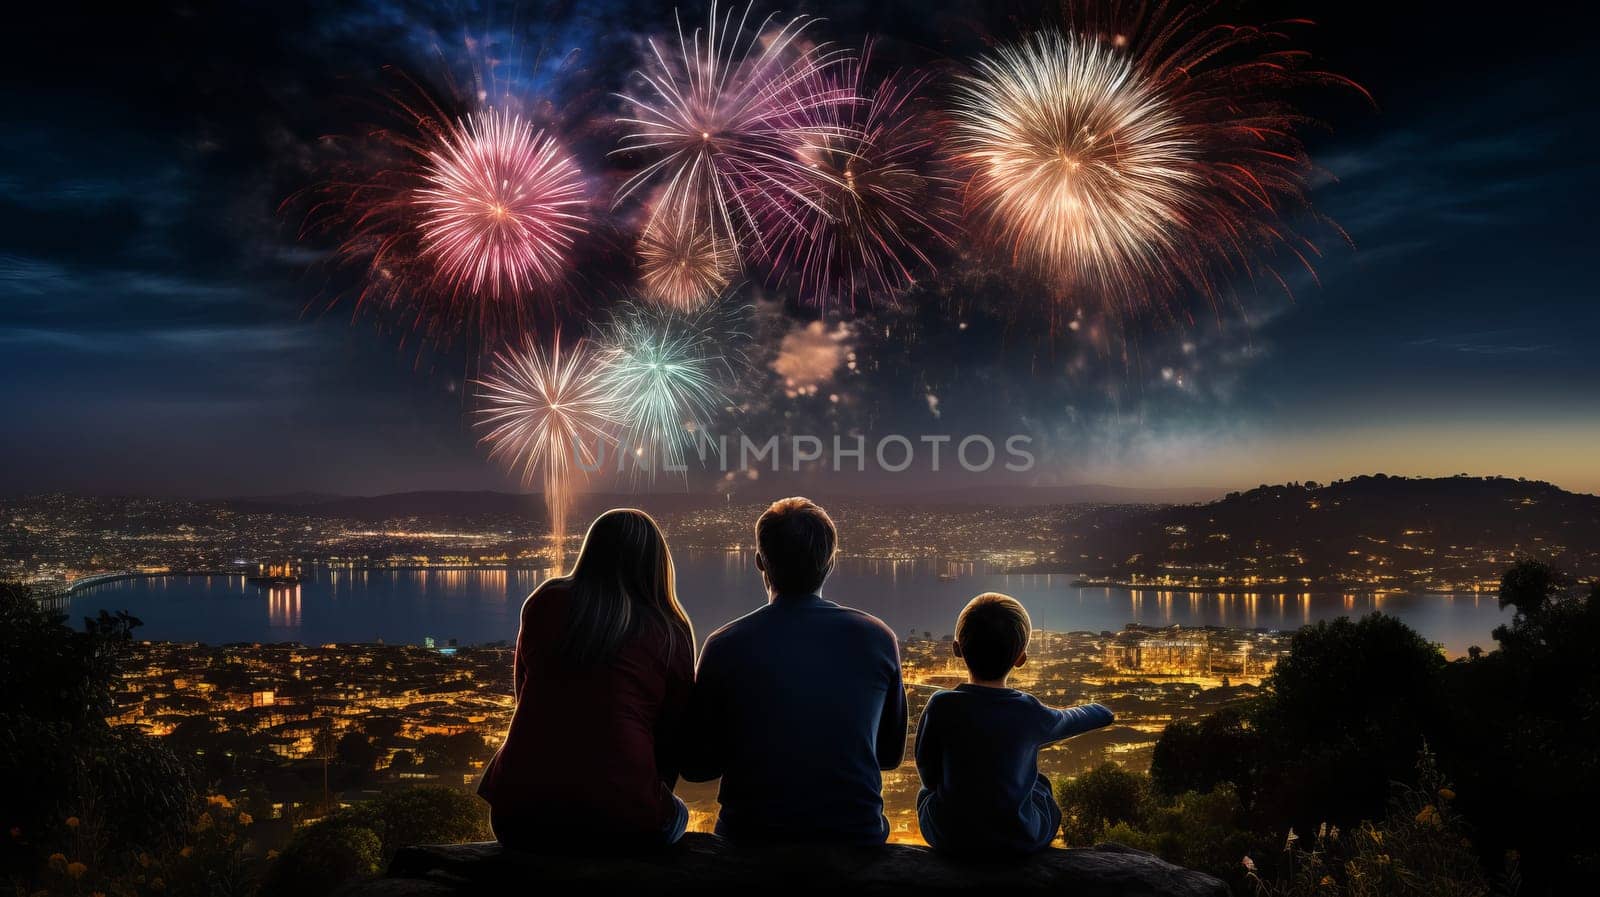 Couple watching fireworks on a cliff Experience a romantic and scenic view of a city at night with fireworks in the sky with this photo of a couple sitting on a cliff. High quality photo